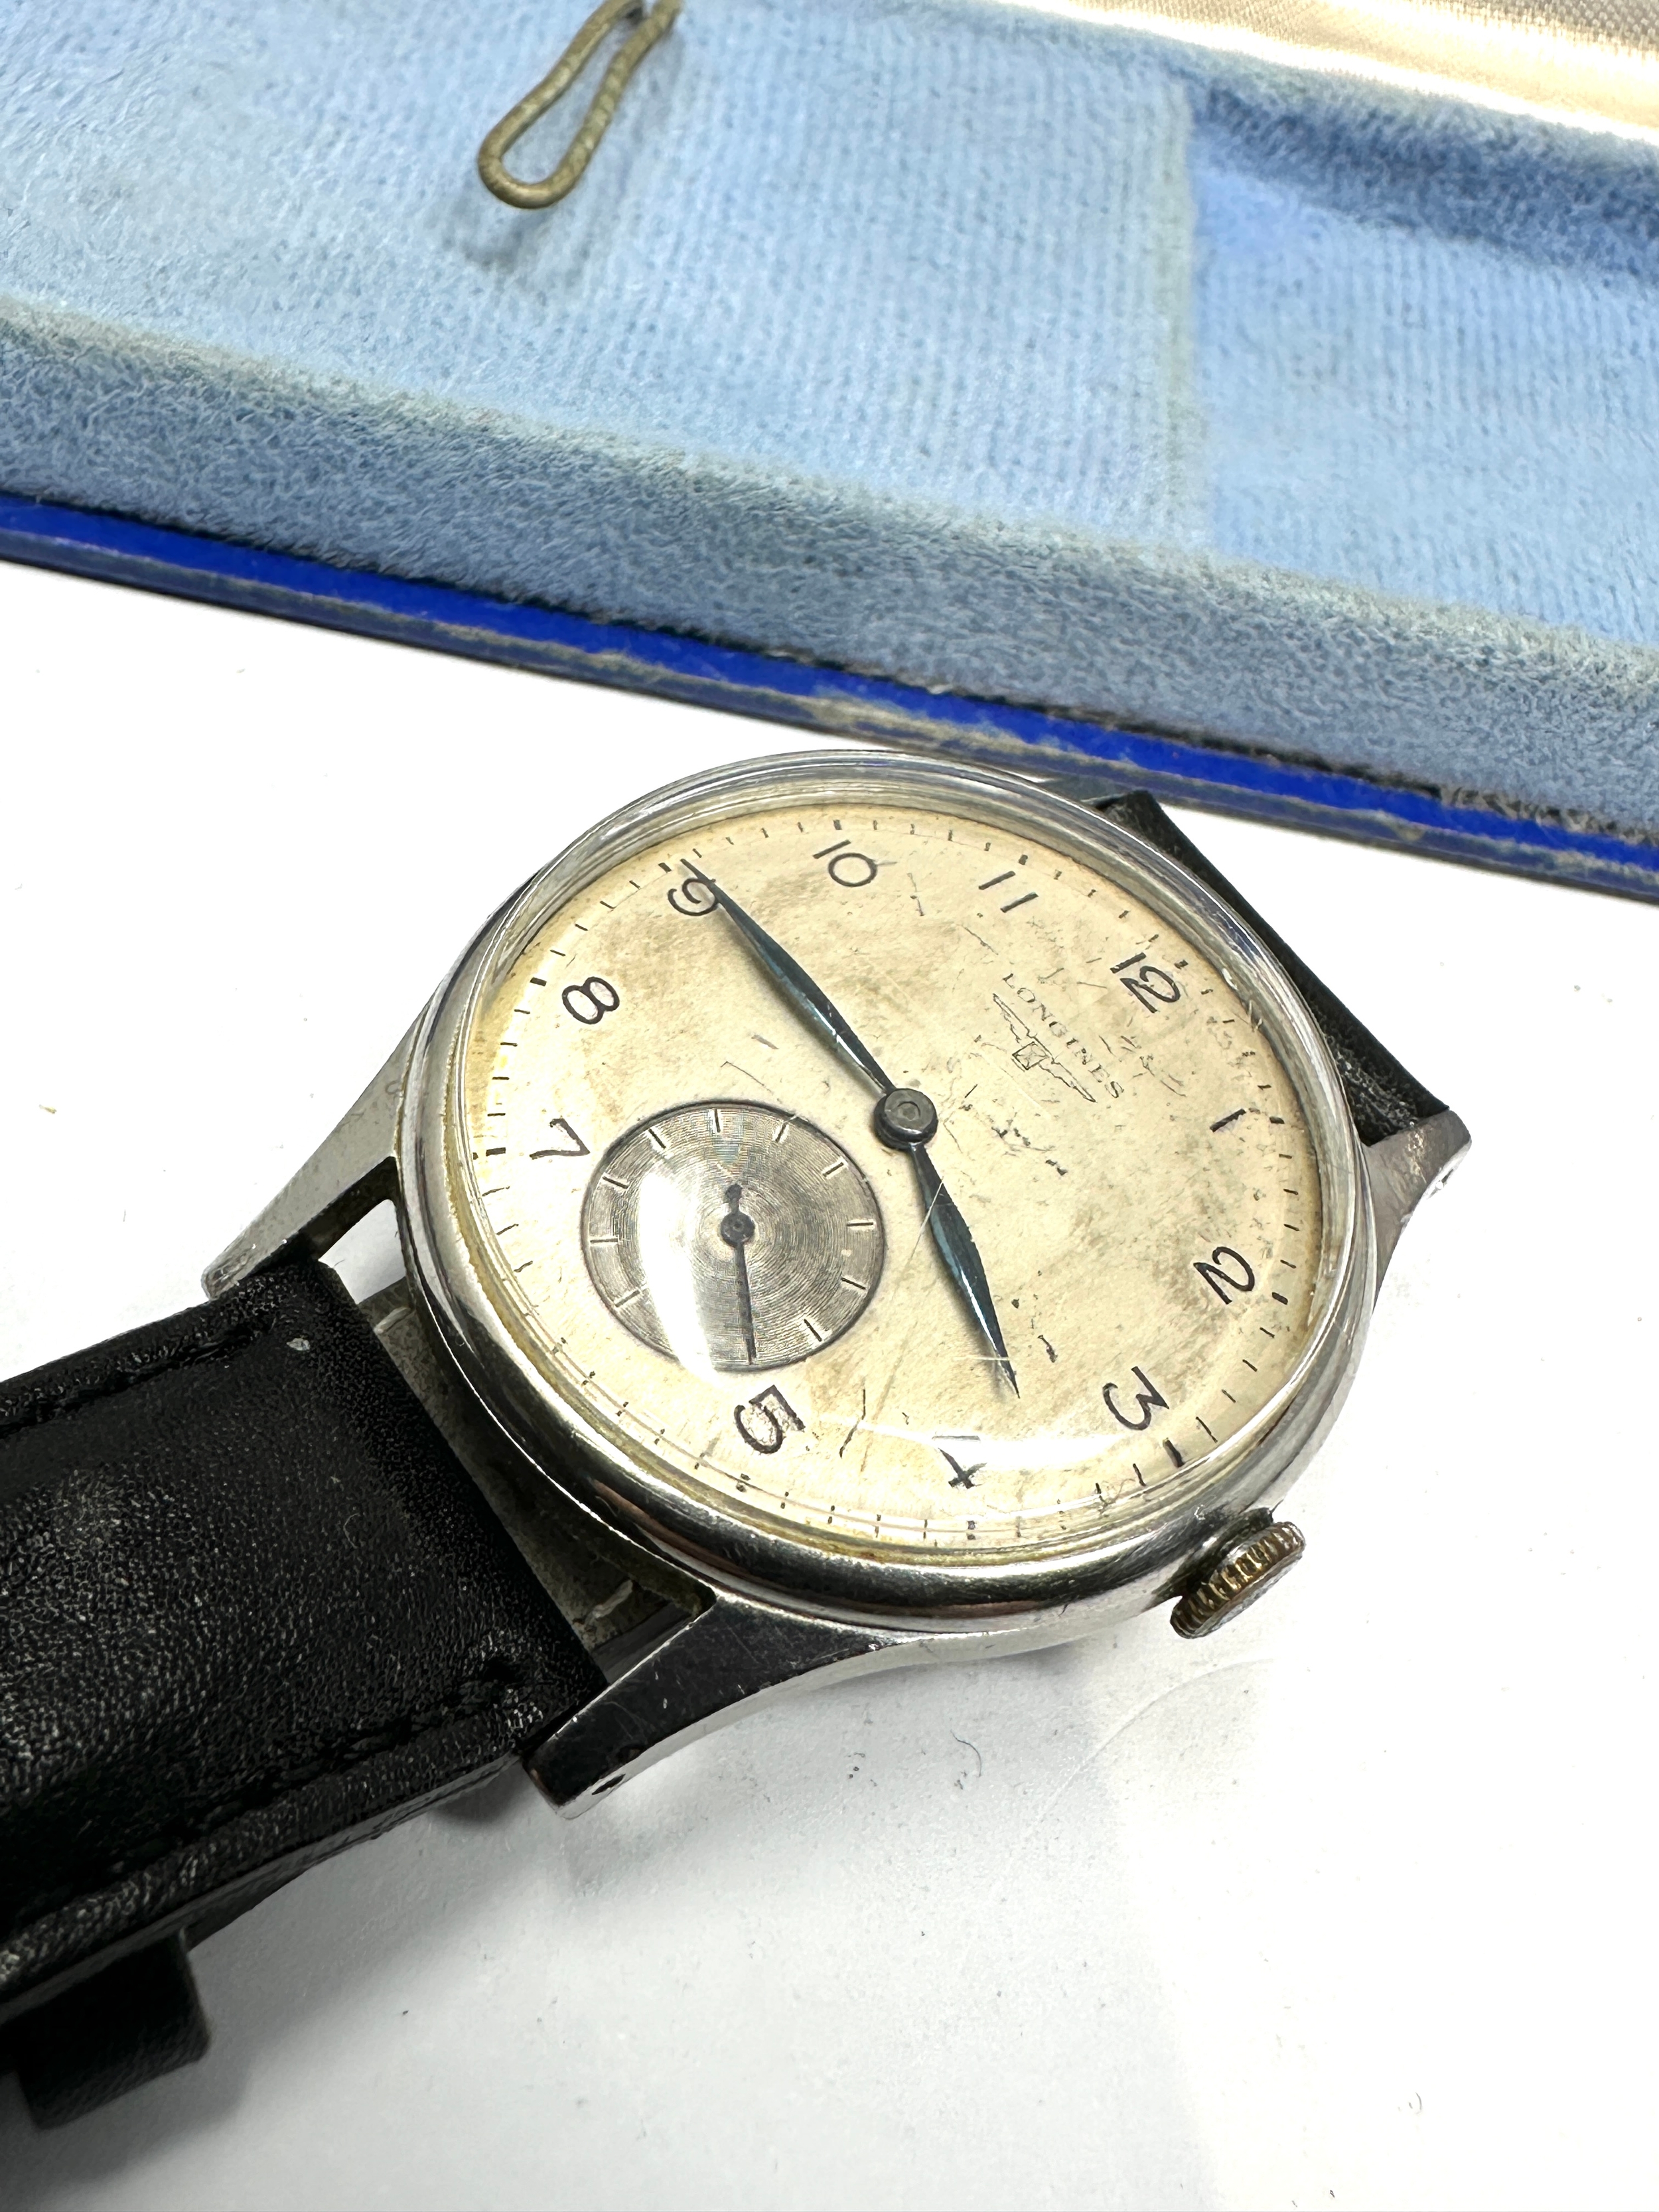 Original boxed vintage Longines gents wristwatch the watch is ticking - Image 2 of 4